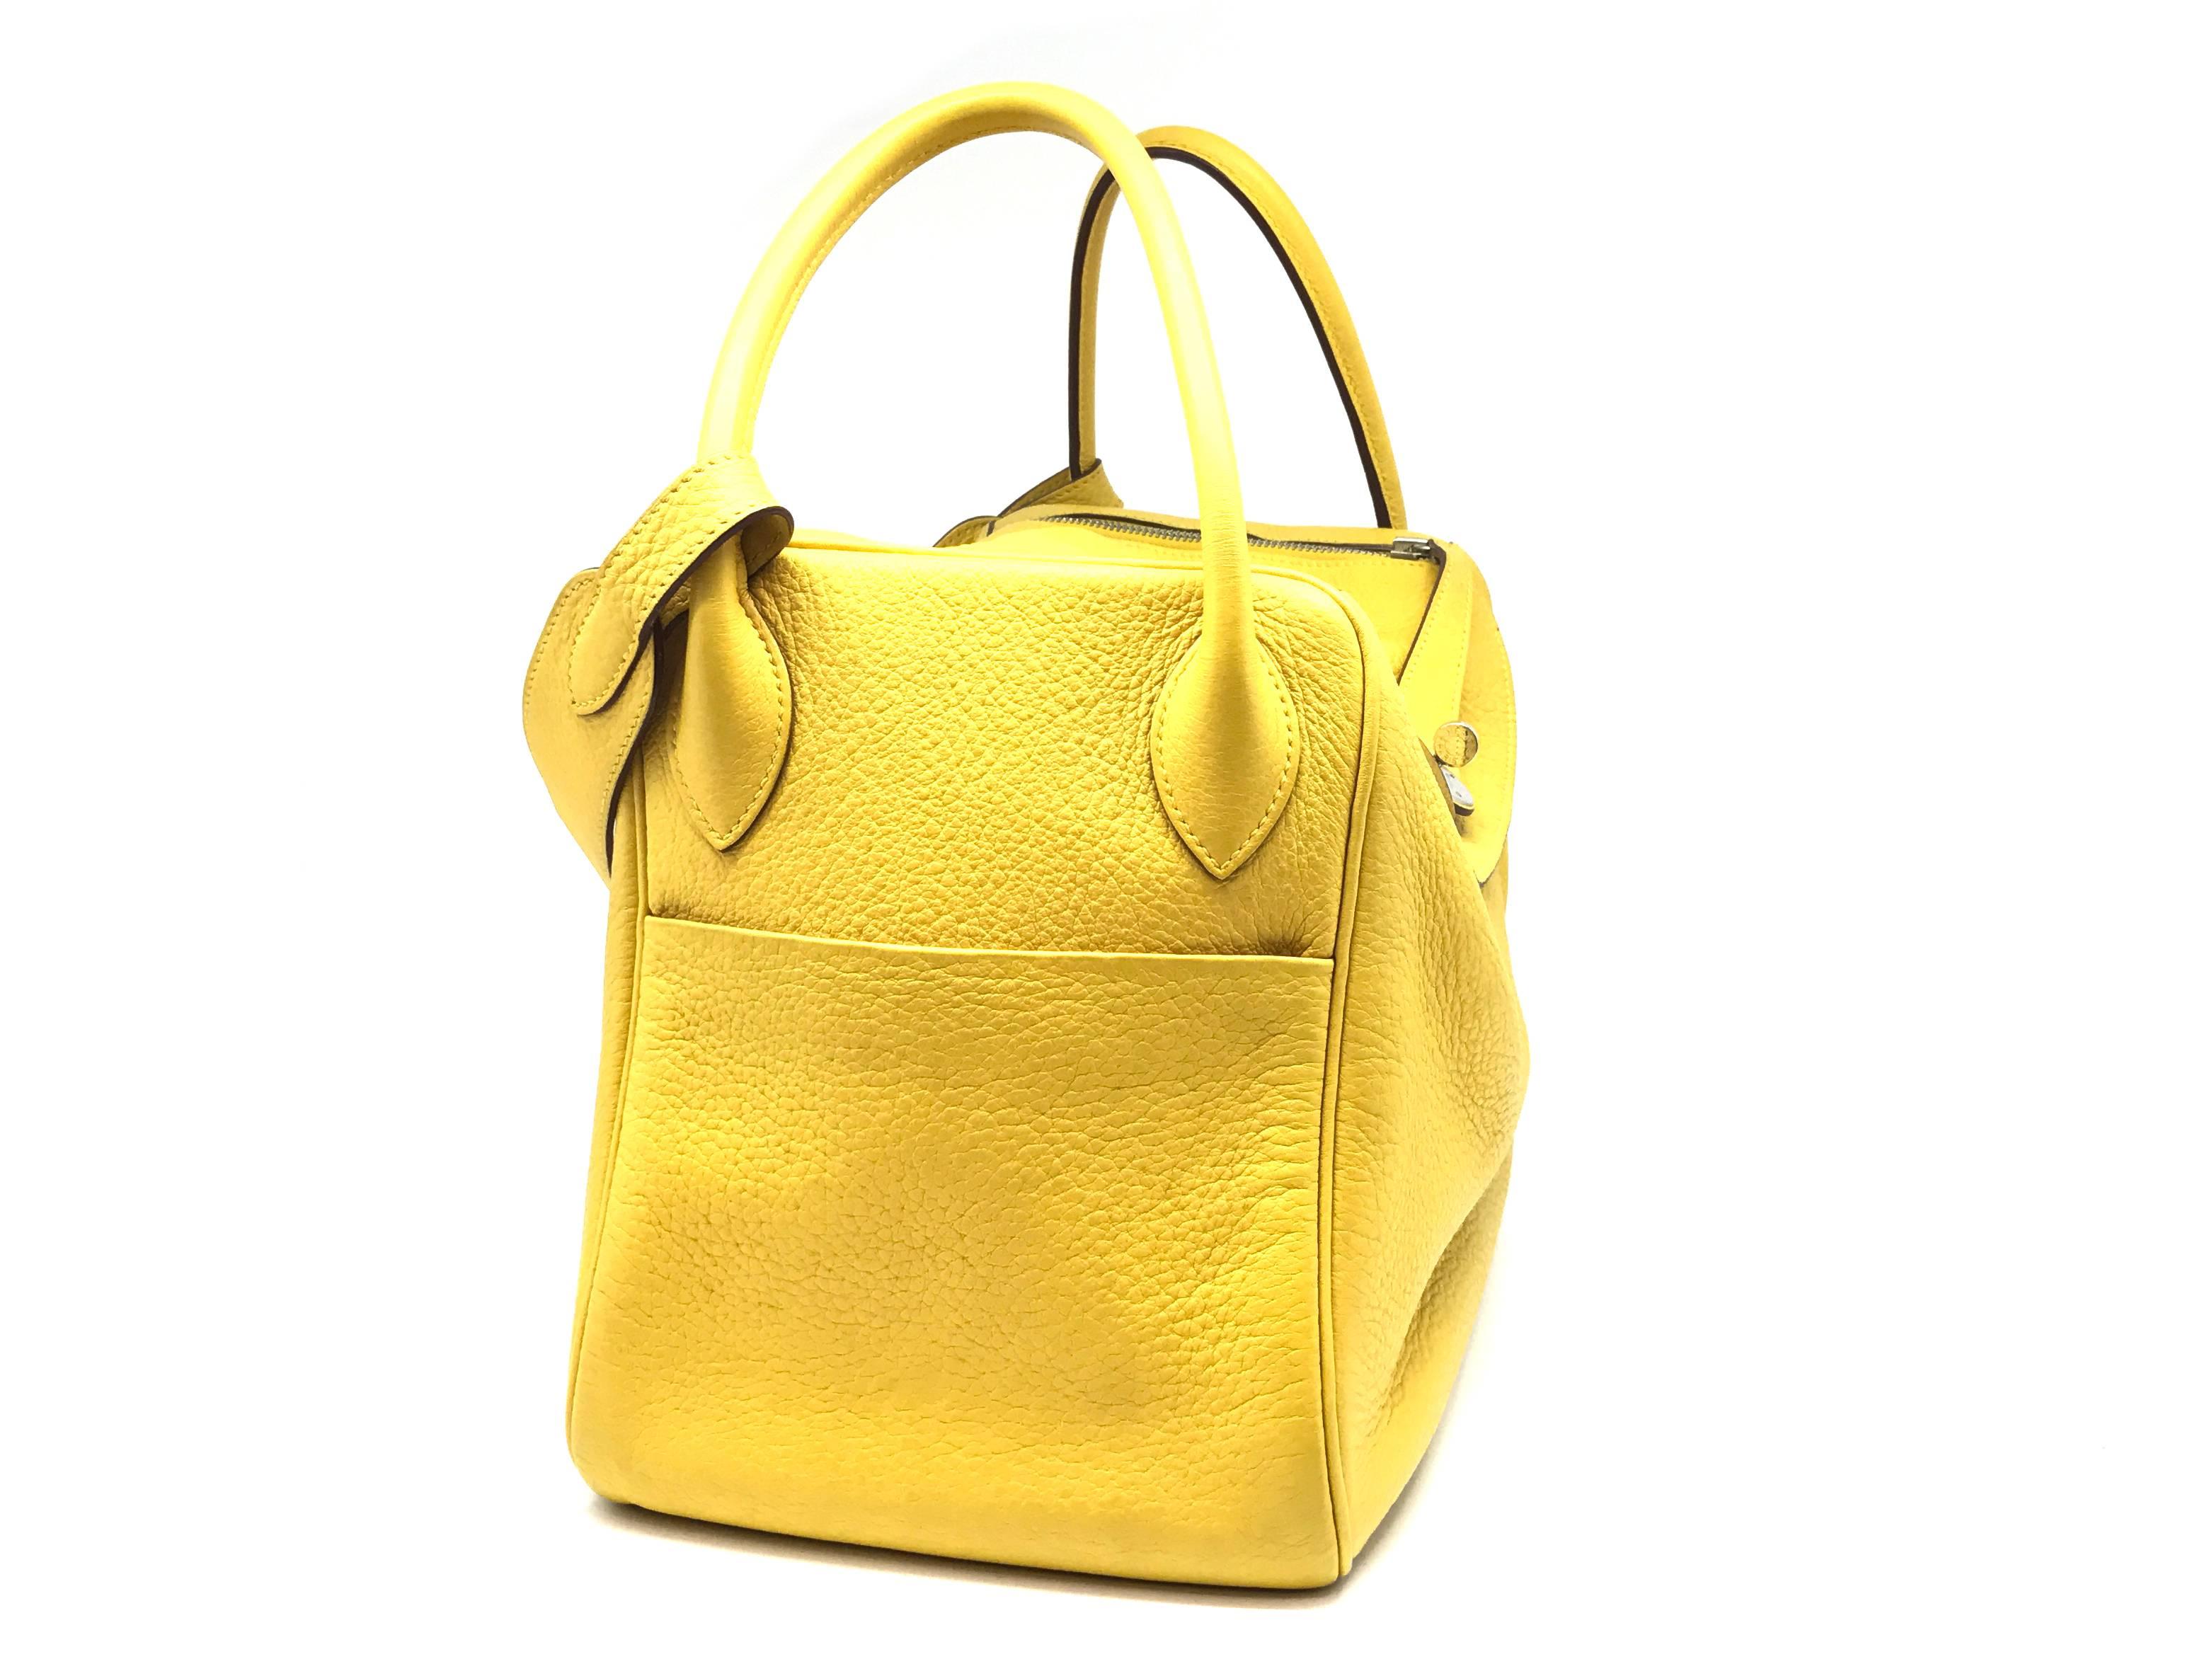 Color: Yellow / Soleil (designer color)
Material: Clemence Leather

Condition:
Rank A
Overall: Good, few minor defects
Surface: Minor Scratches & Stains 
Corners: Minor Scratches & Stains
Edges: Minor Stains
Handles/Straps: Minor Scratches